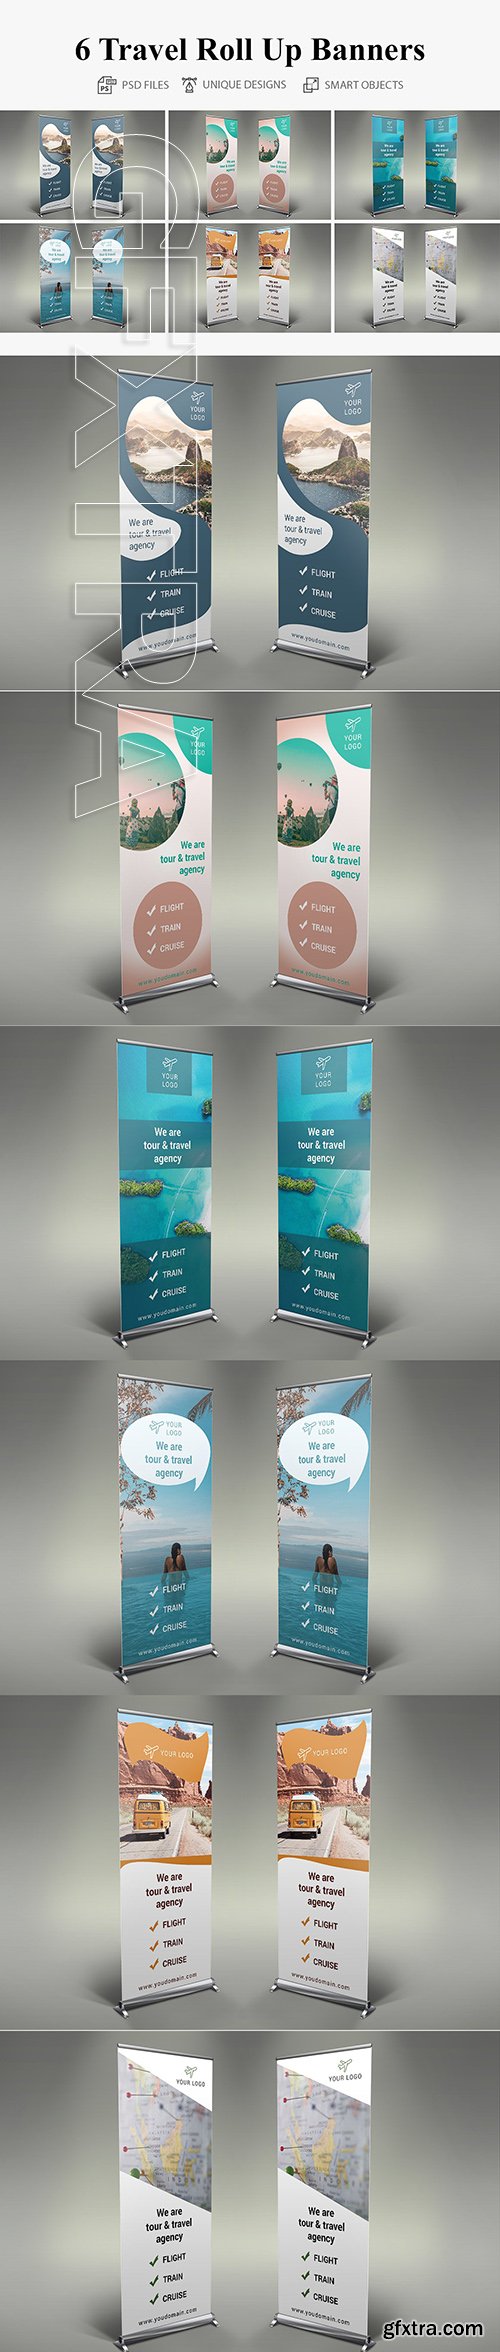 CreativeMarket - Travel Roll Up Banners 3632362